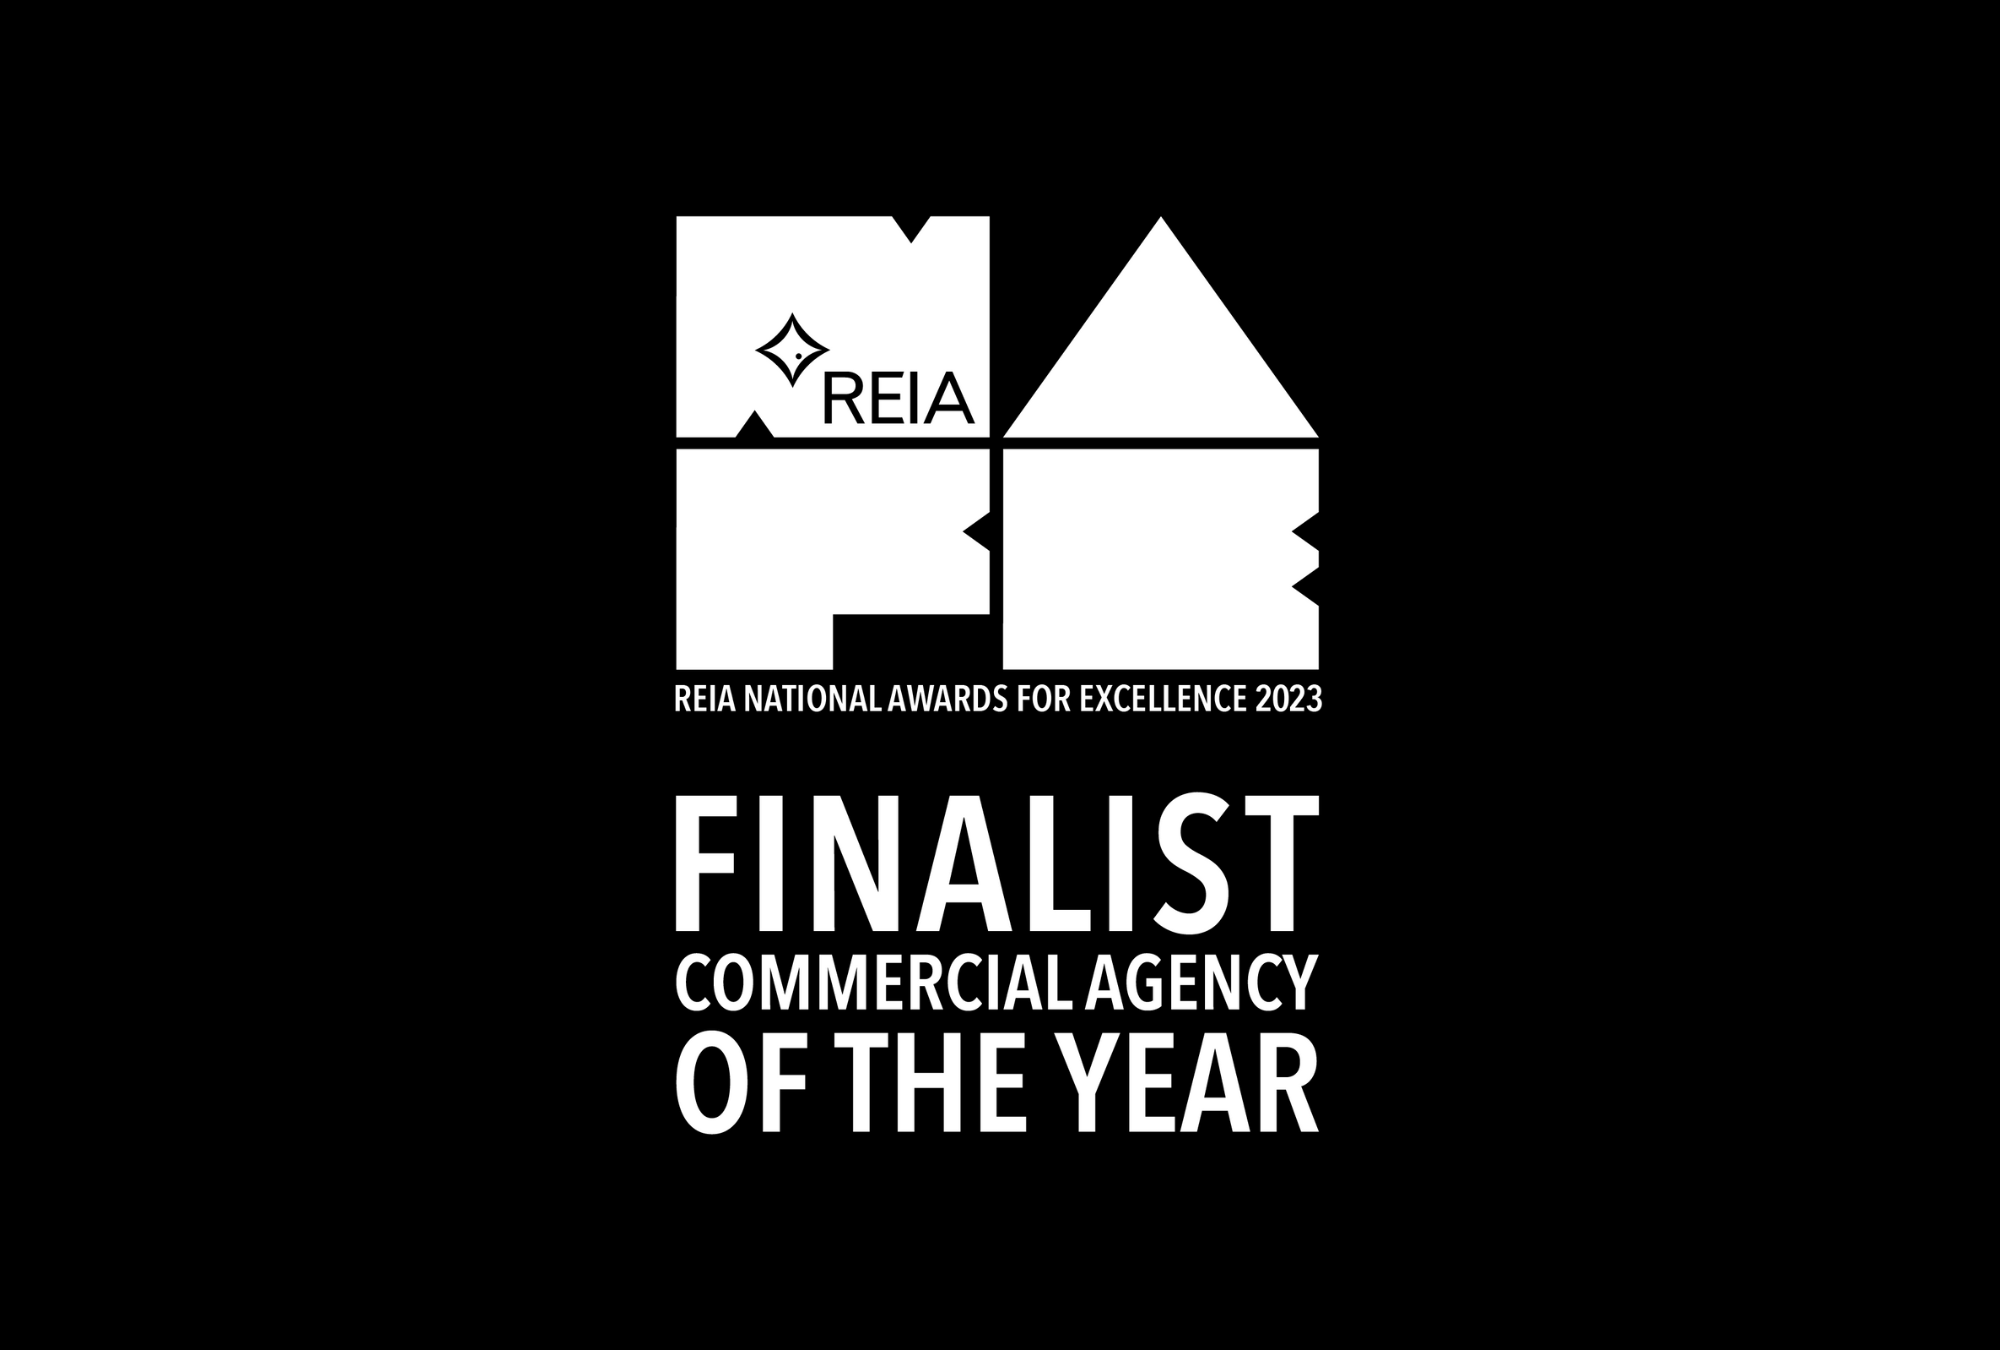 MMJ Wollongong - National Finalists in the REIA Awards for Excellence.